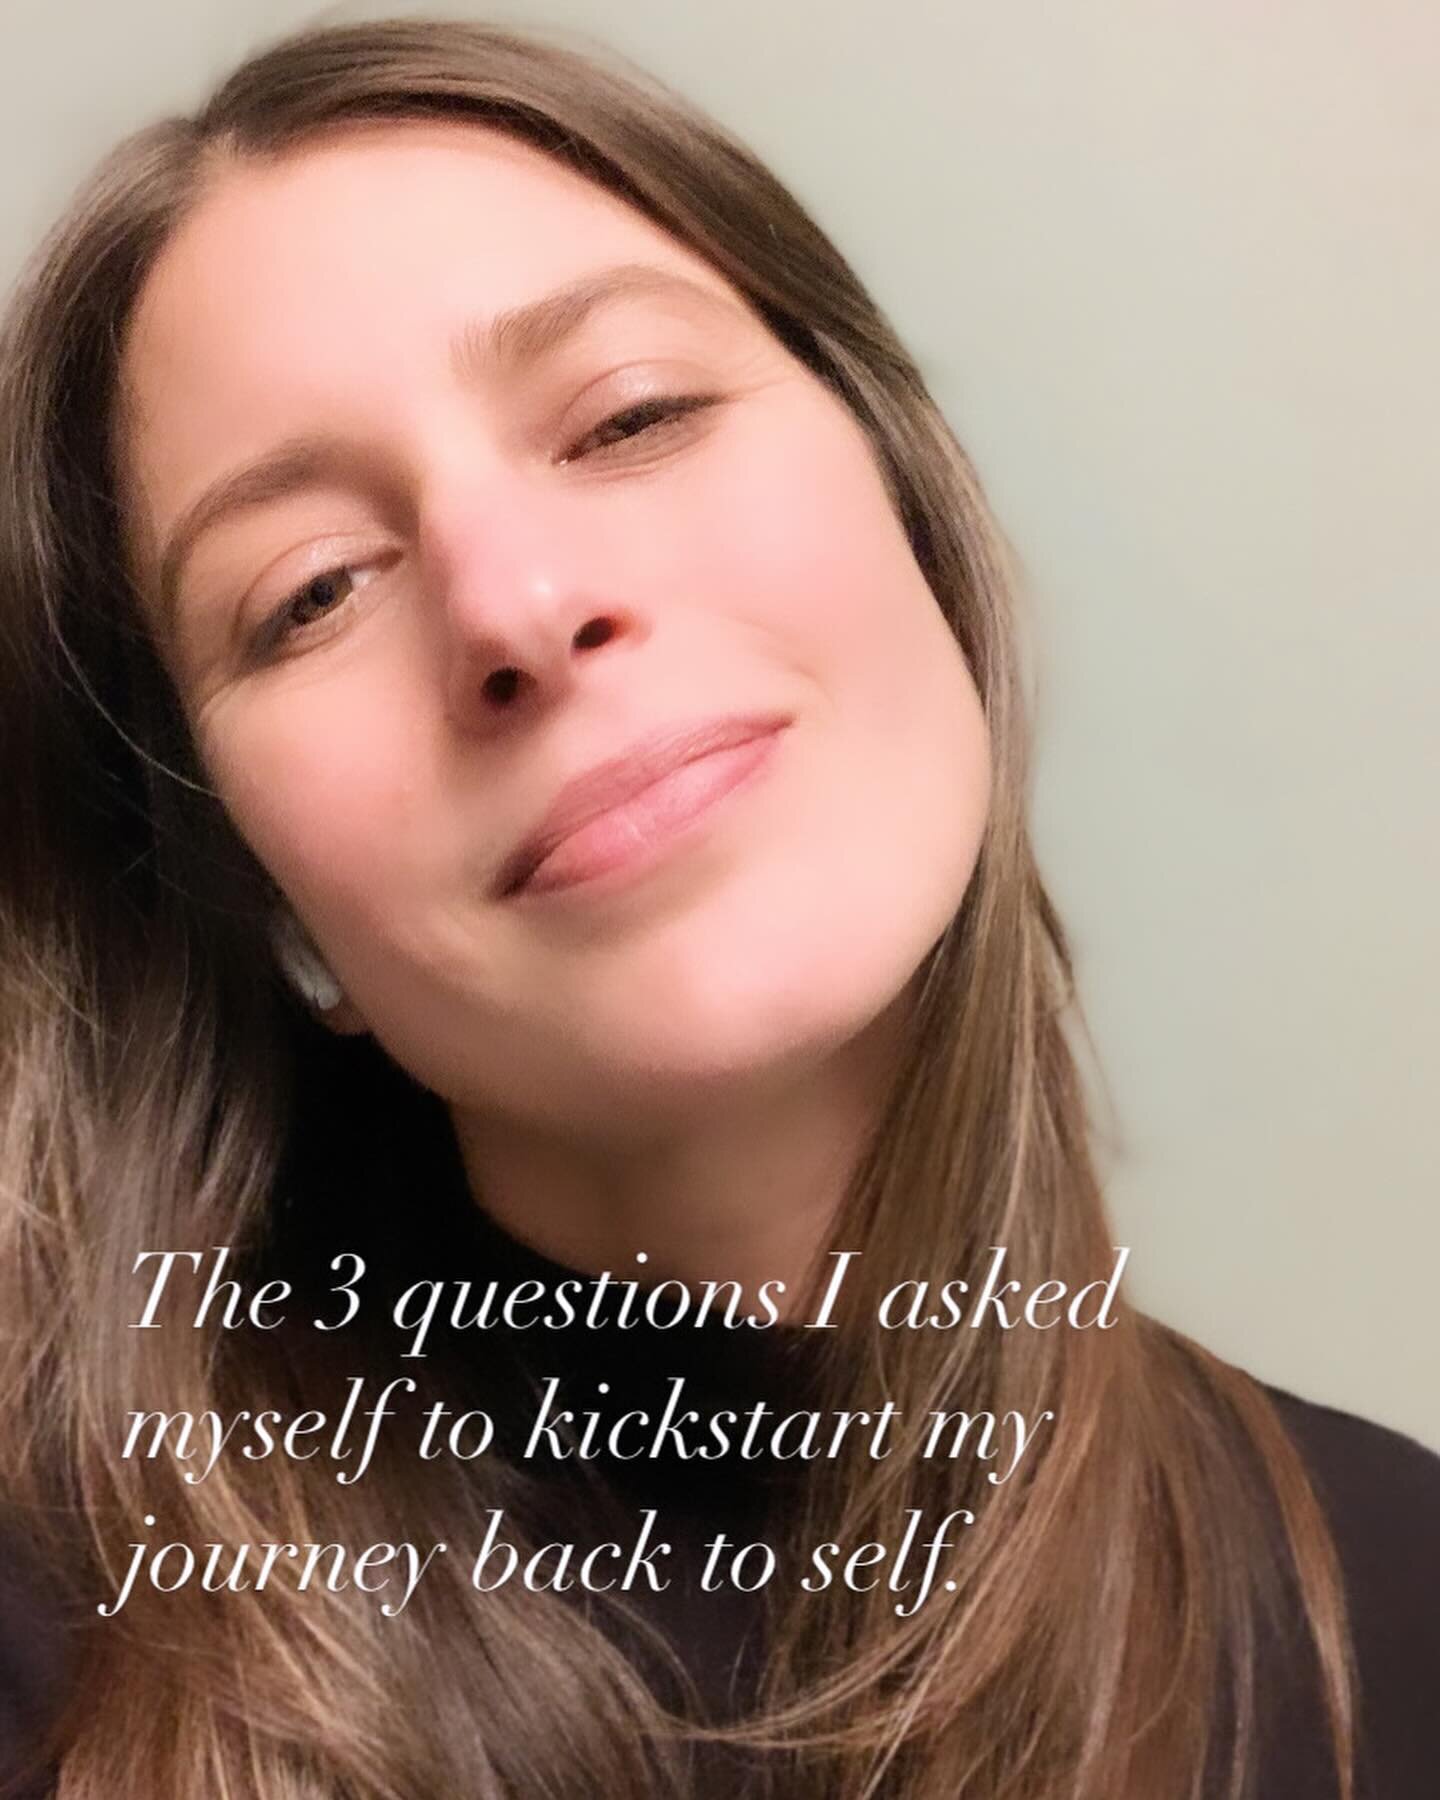 For me emotional rock bottom was an overwhelming feeling of hopelessness mixed with fear and anxiety. 

When I finally decided enough, I still had no idea what to do but then I had this thought&hellip;

What do I want to feel instead? I want to feel 